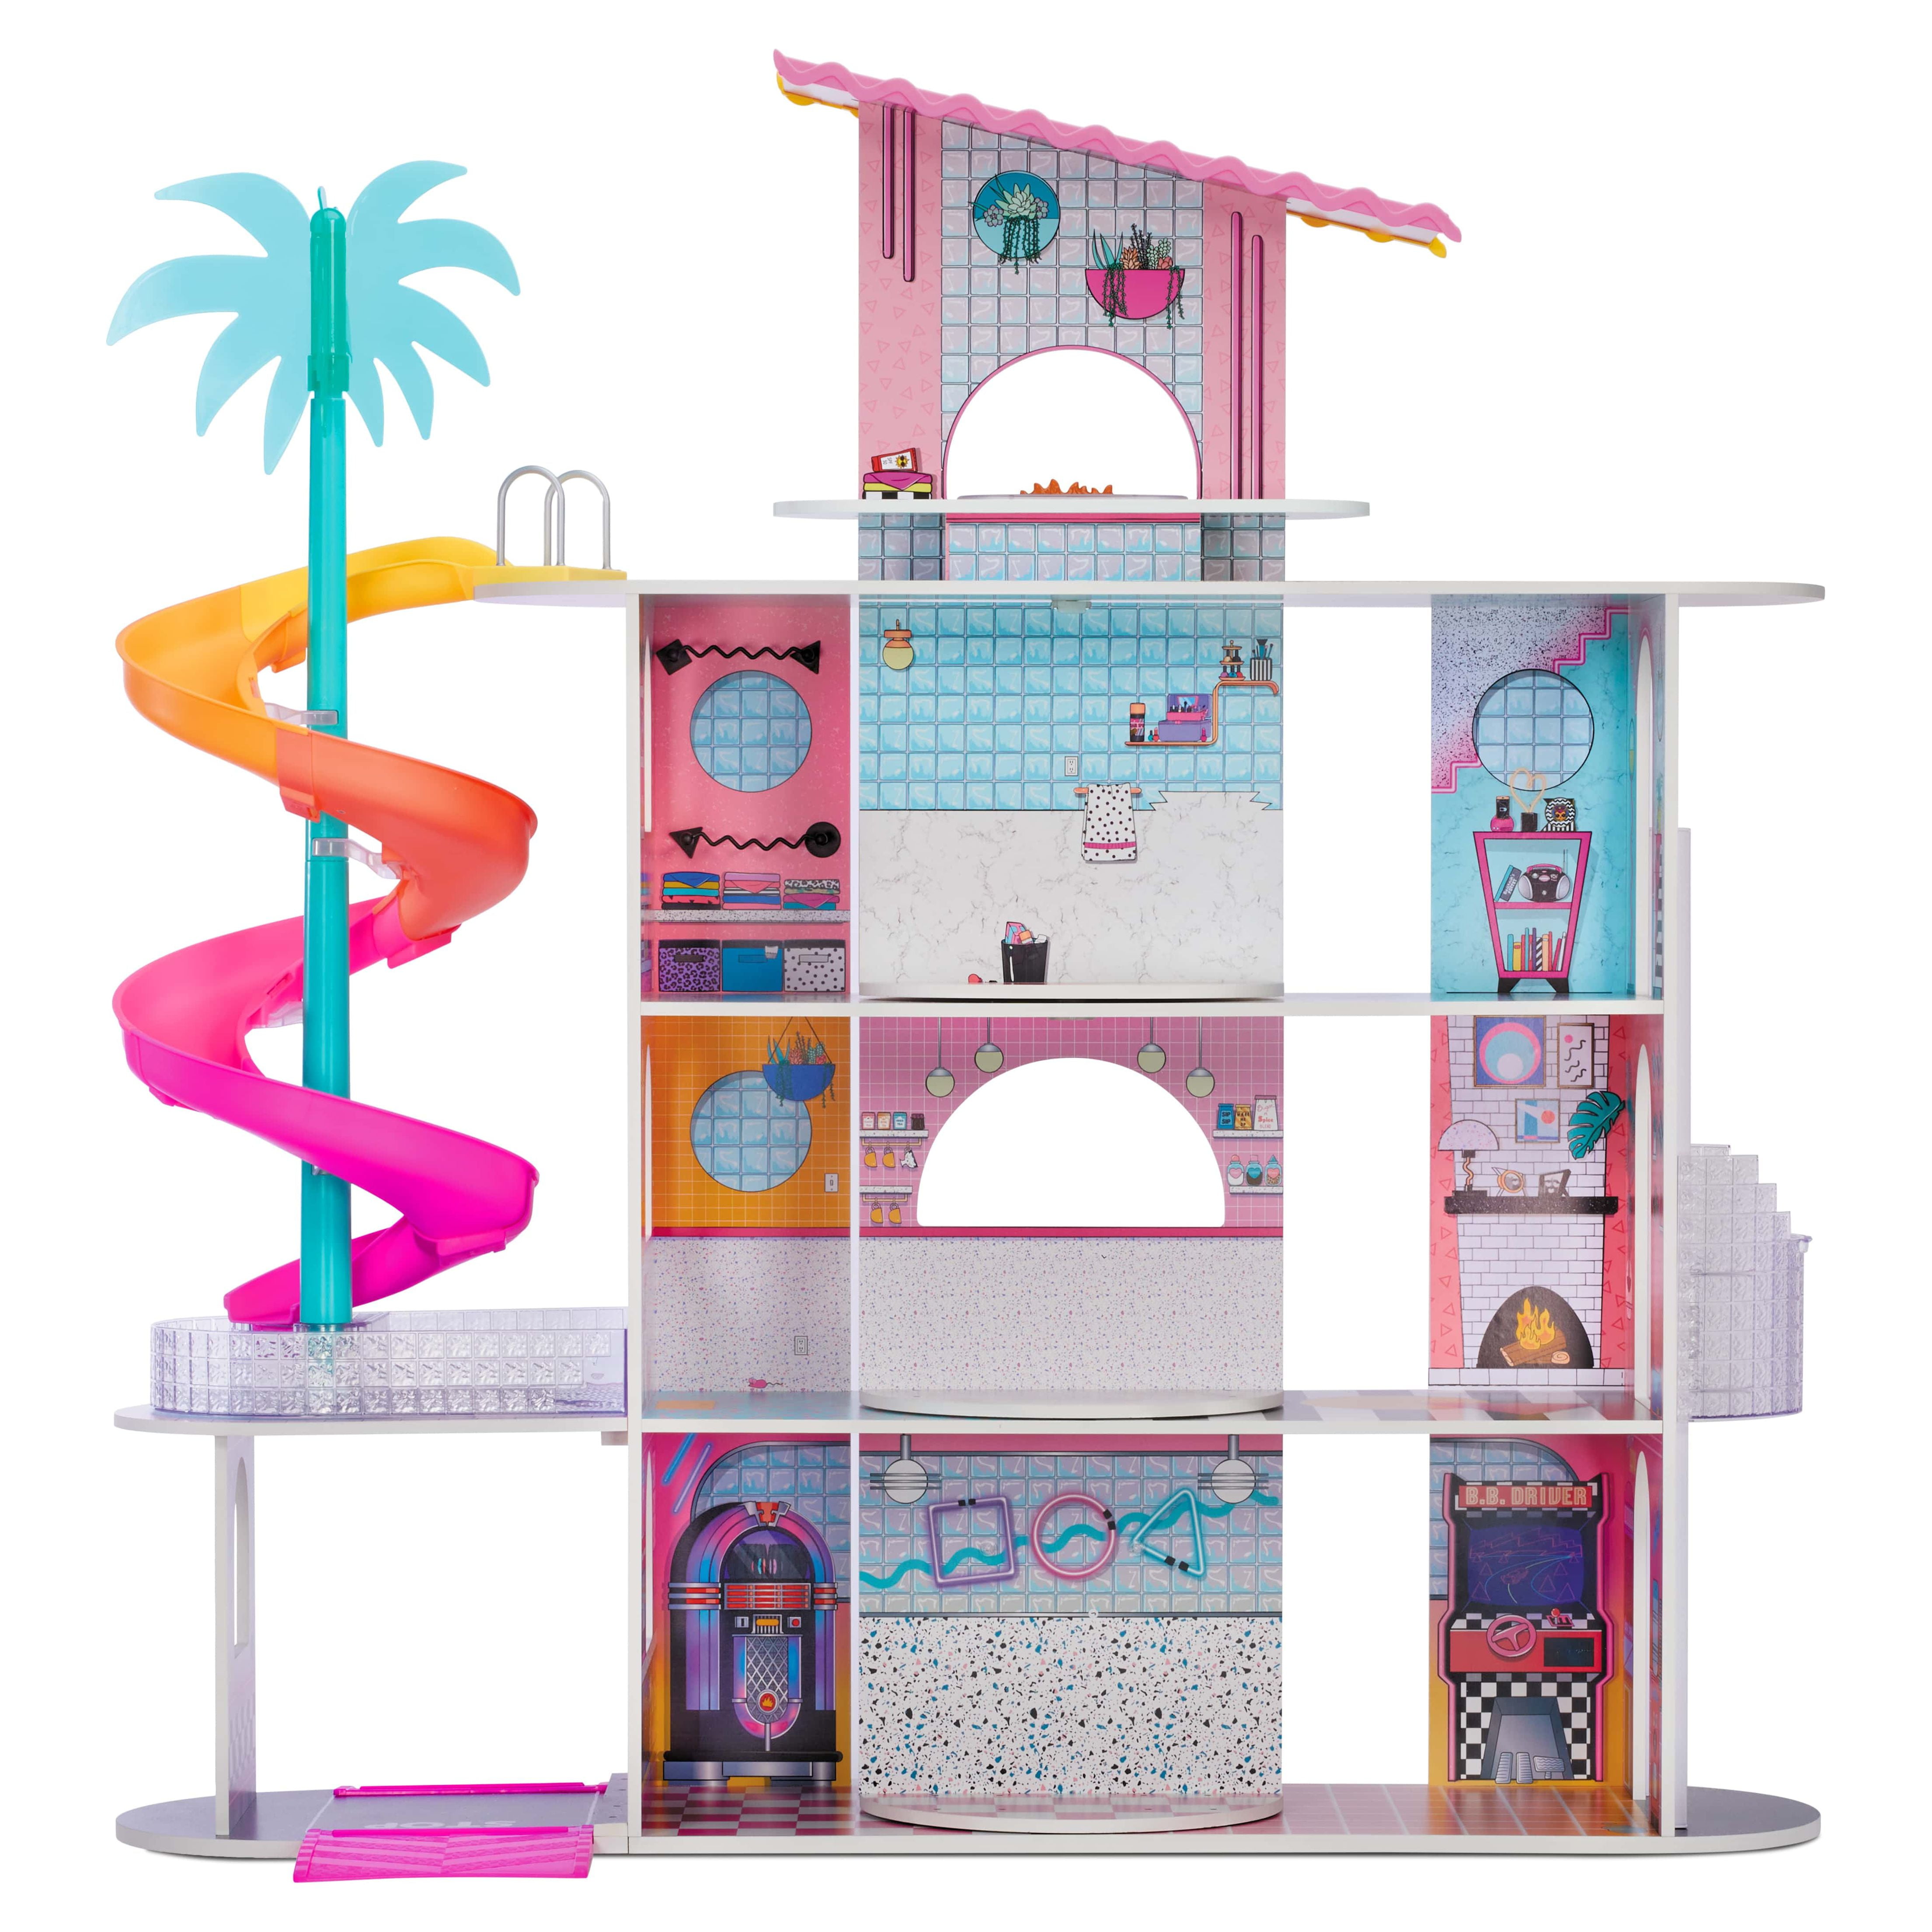  L.O.L. Surprise! OMG House of Surprises Beauty Booth Playset  with Her Majesty Collectible Doll and 8 Surprises, Dollhouse Accessories,  Holiday Toy, Great Gift for Kids Ages 4 5 6+ Years 